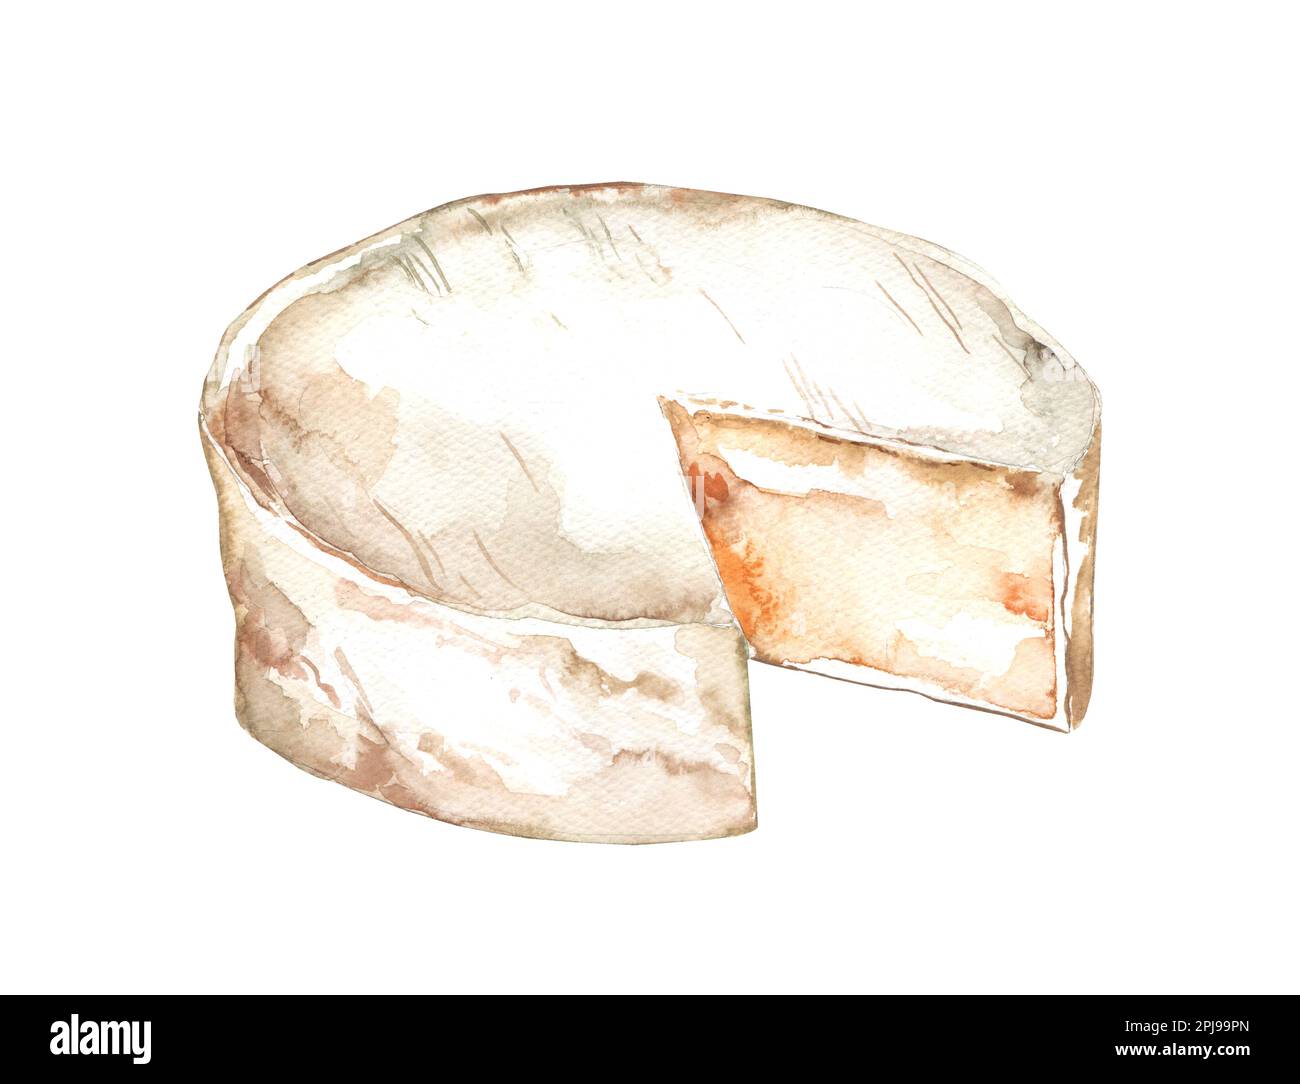 Brie type of cheese. Ripe Camembert, white mould Italian, French cheese set. Hand drawn watercolor illustration, isolated on white background Stock Photo